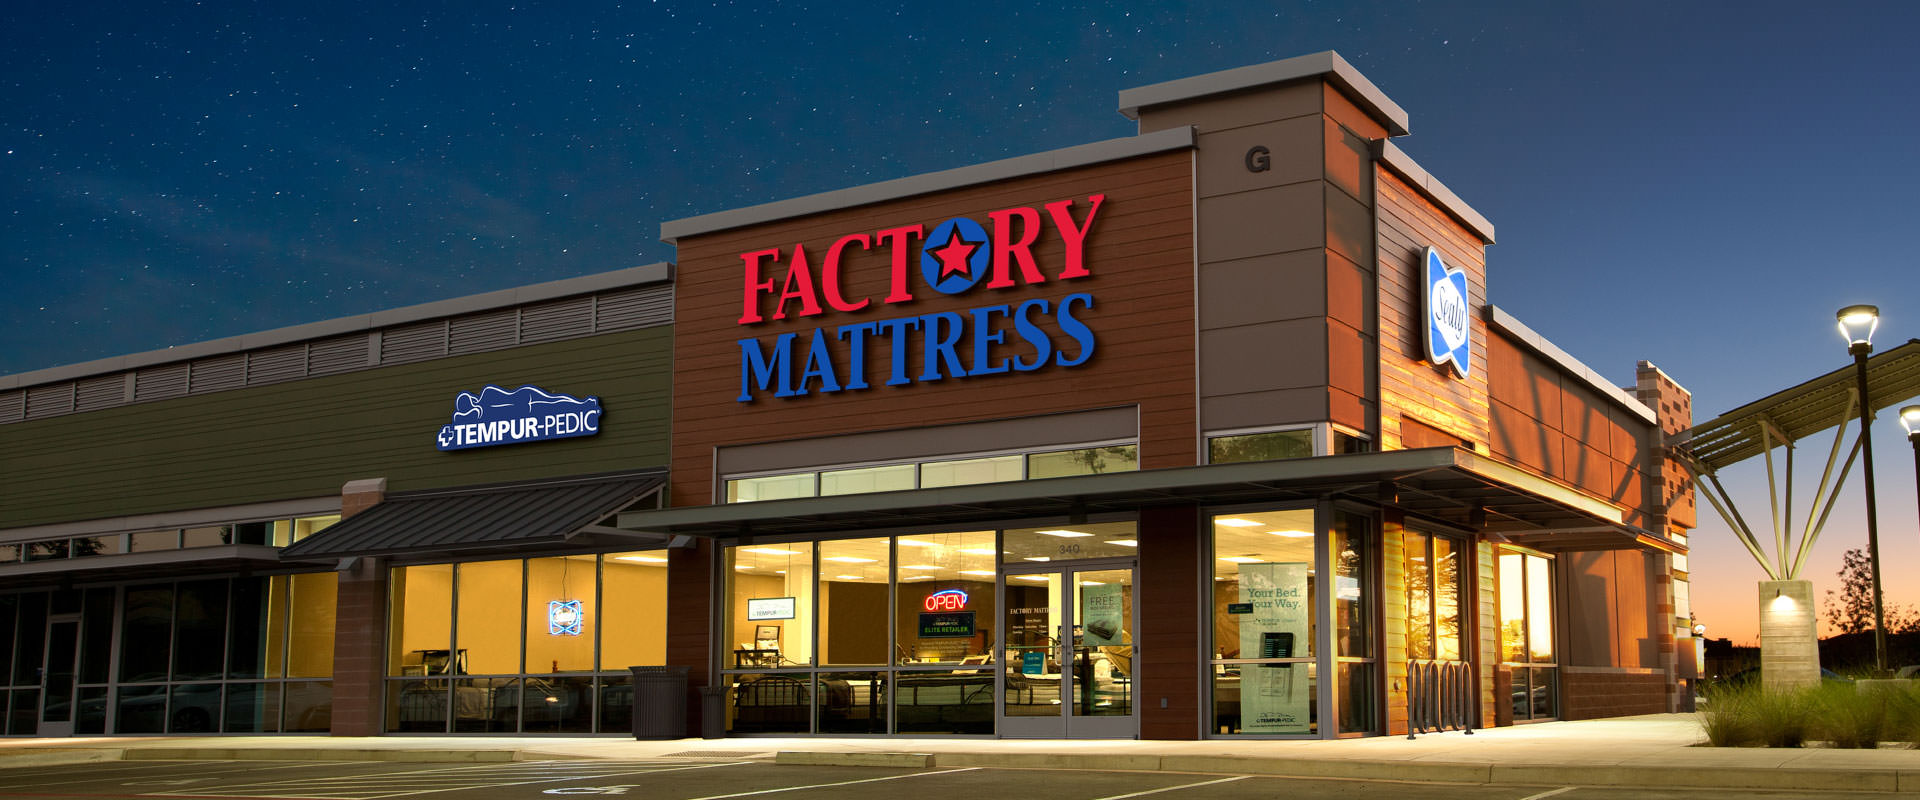 sealy mattress factory locations